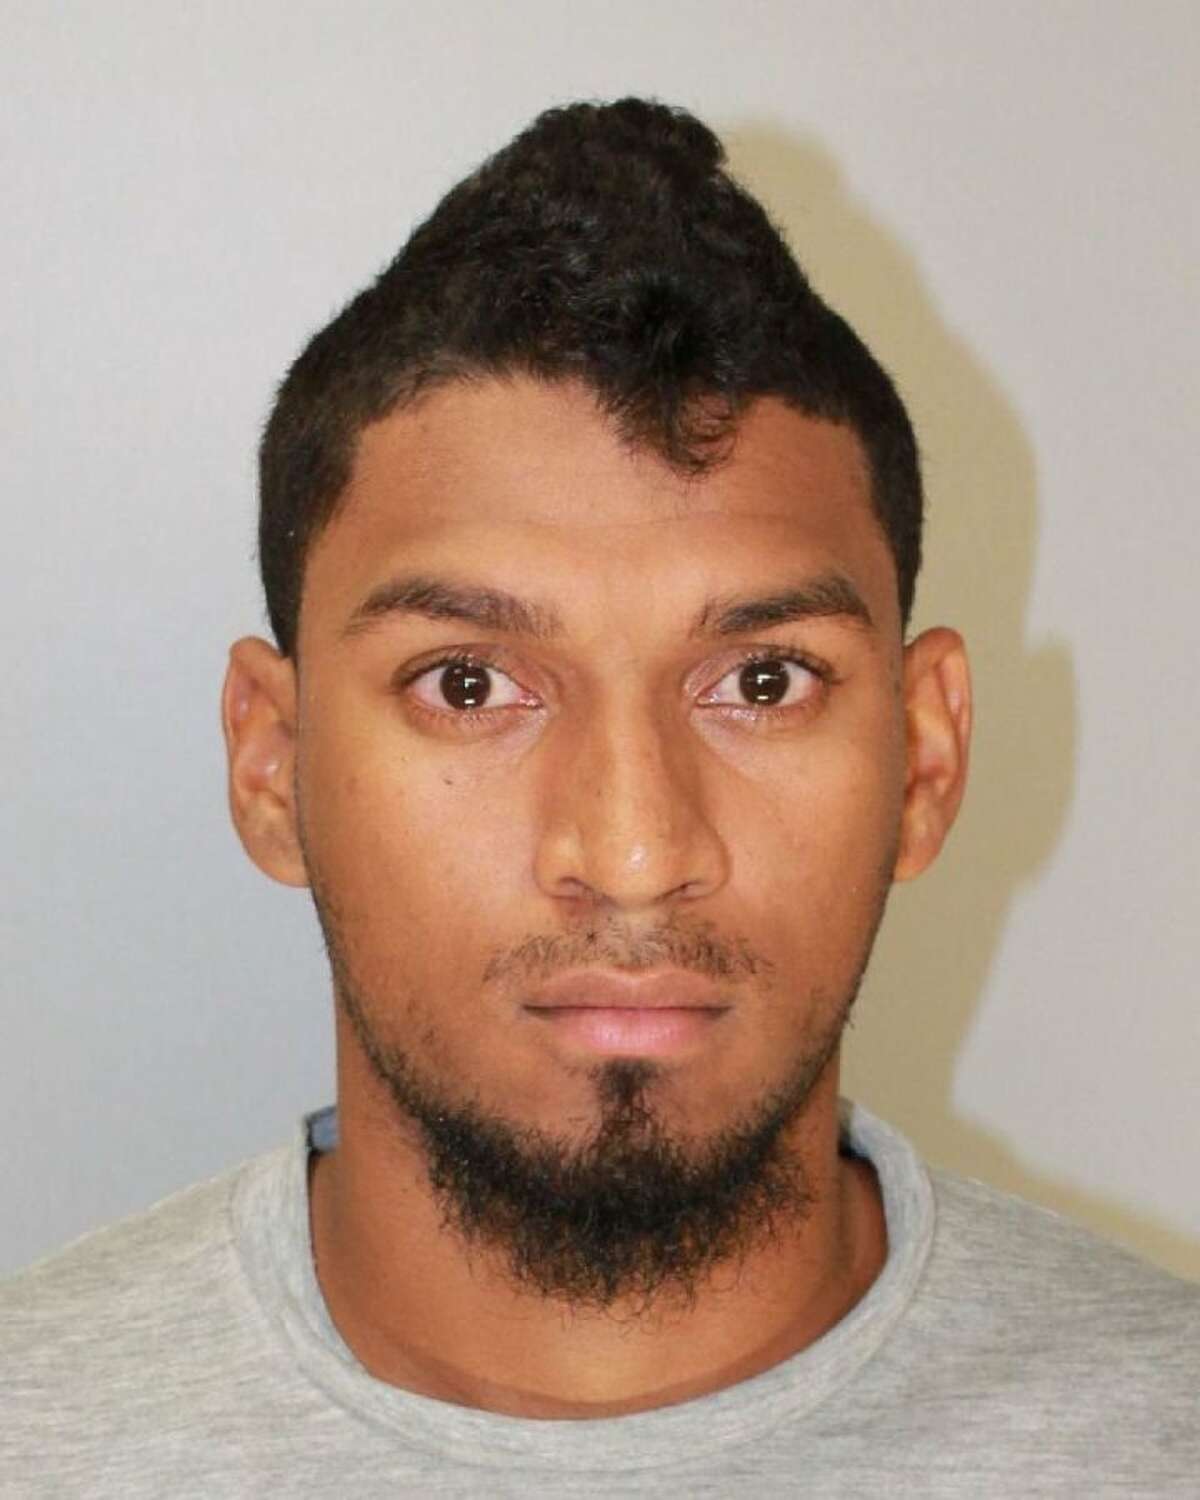 Astros minor leaguer Danry Vasquez was placed on administrative league by Major League Baseball after being arrested on suspicion of assault family violence.